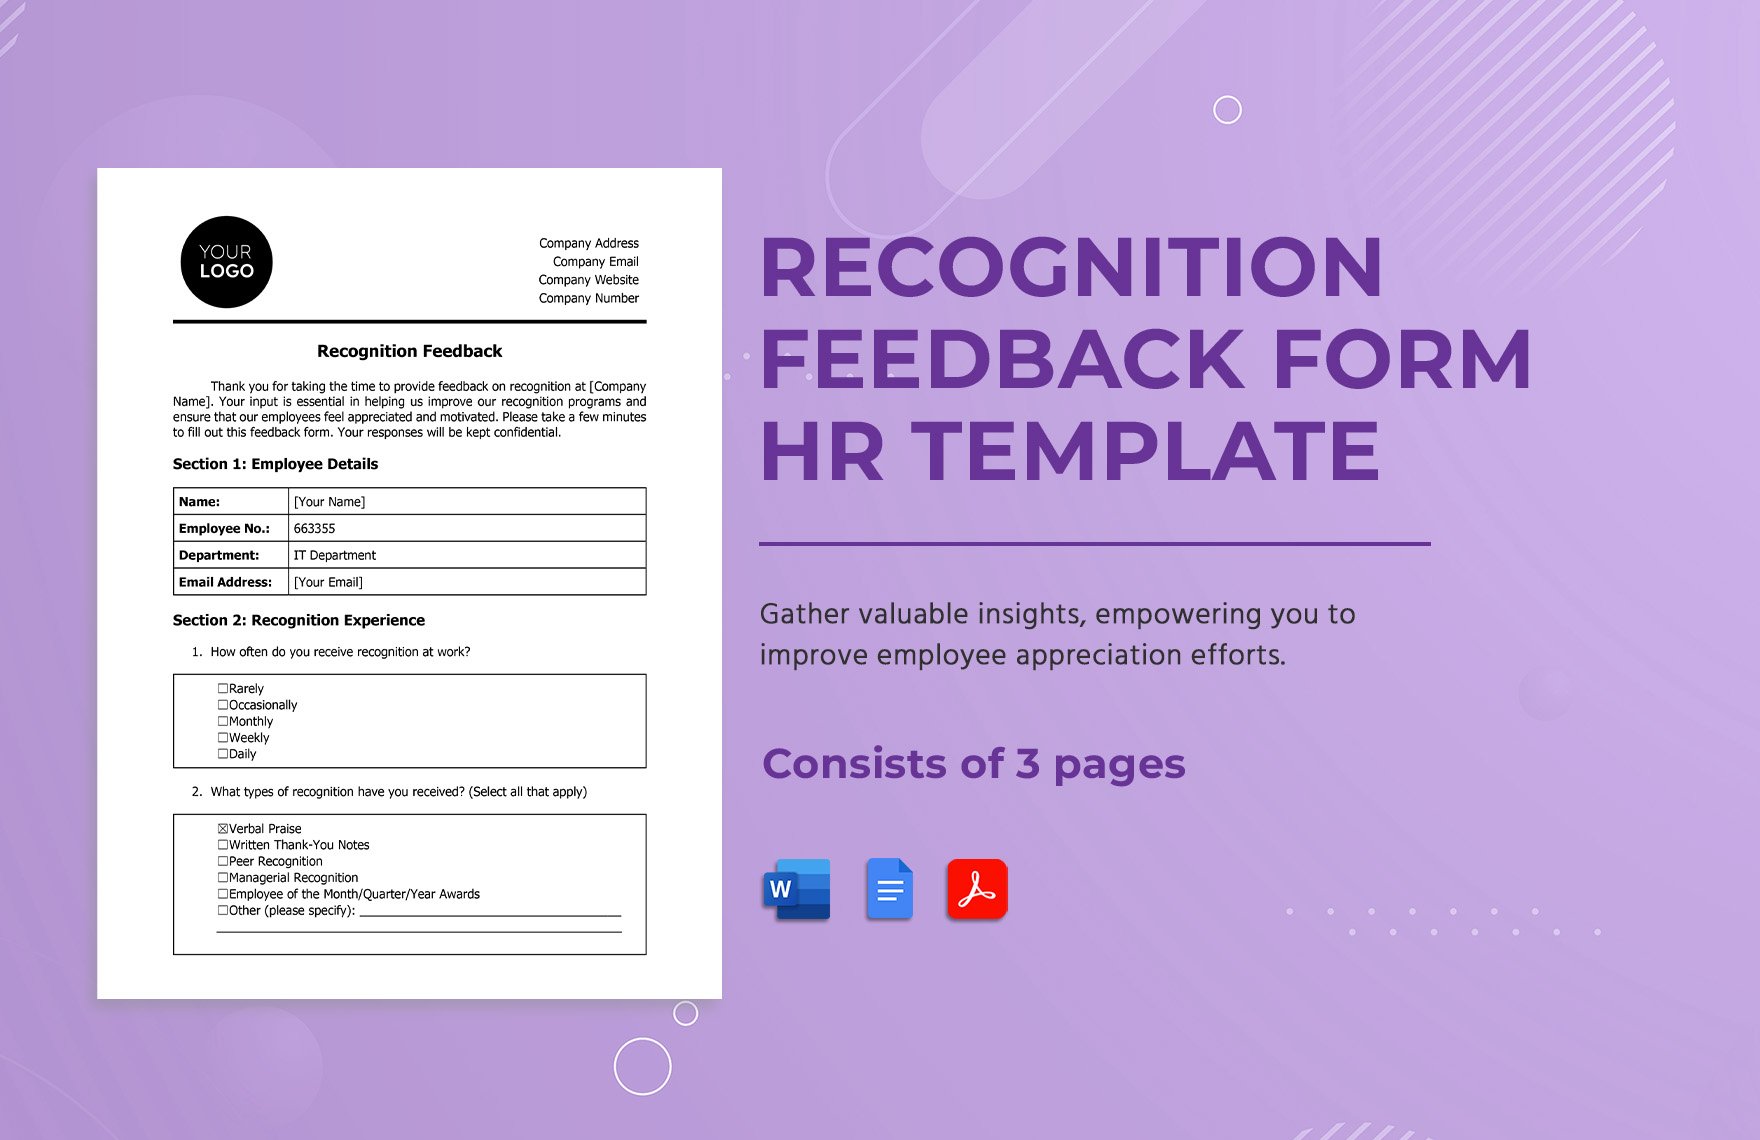 Recognition Feedback Form HR Template in Word, Google Docs, PDF